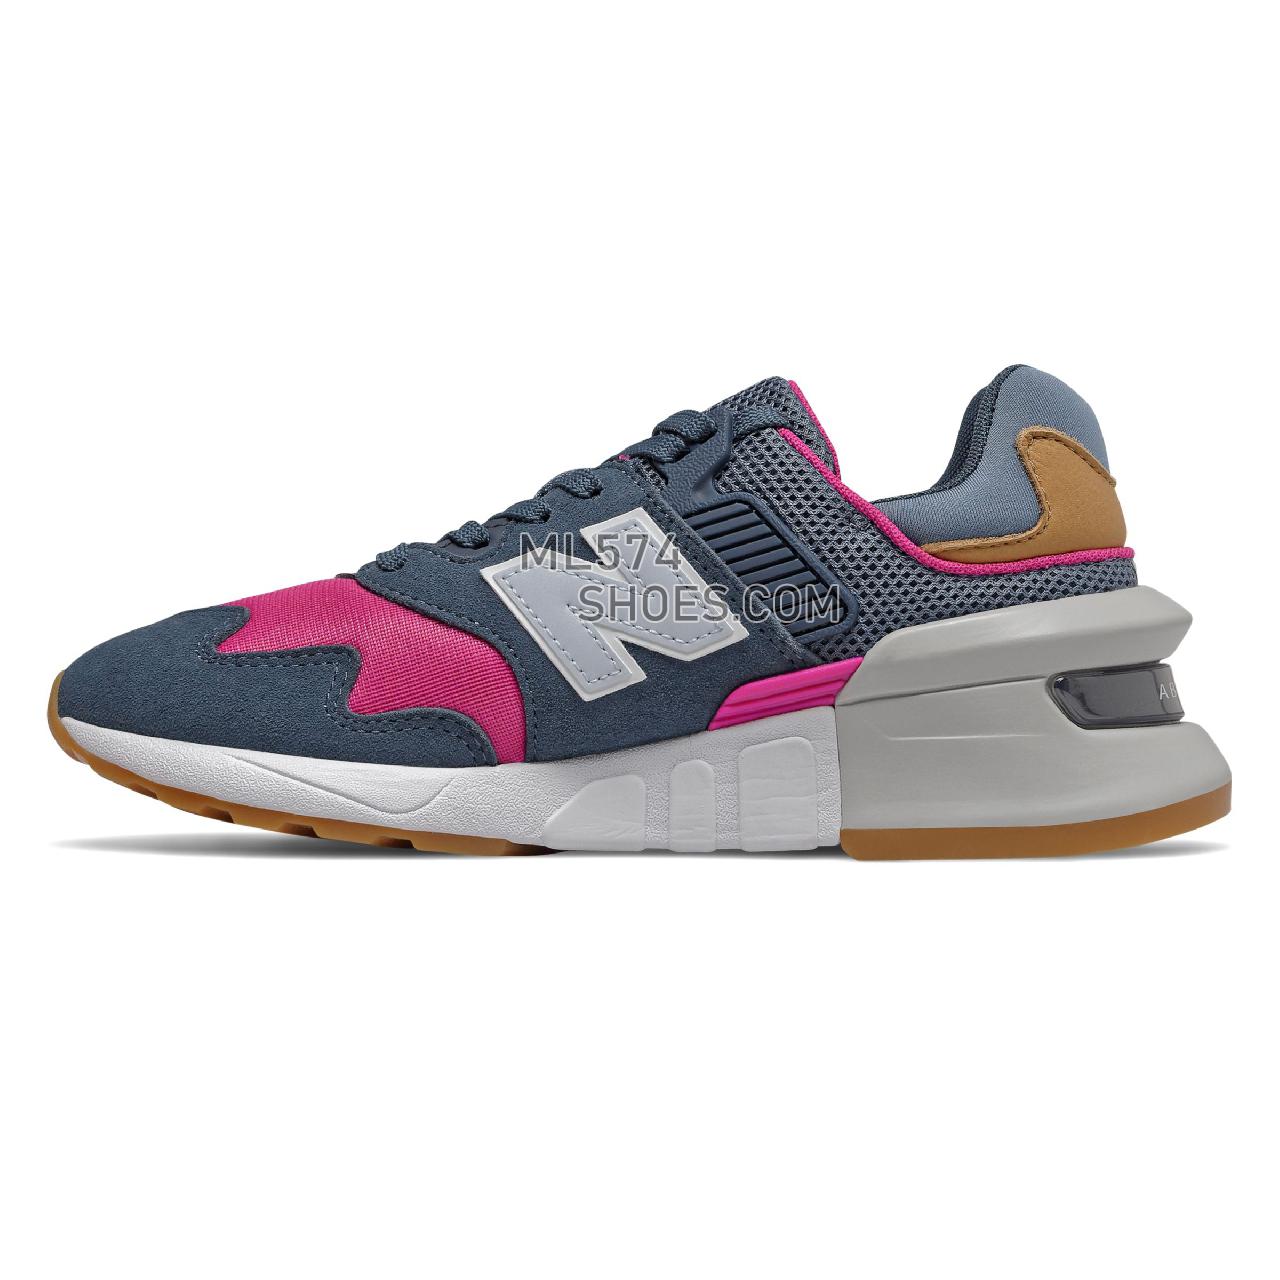 New Balance 997 Sport - Women's Sport Style Sneakers - Stone Blue with Exuberant Pink - WS997JGA